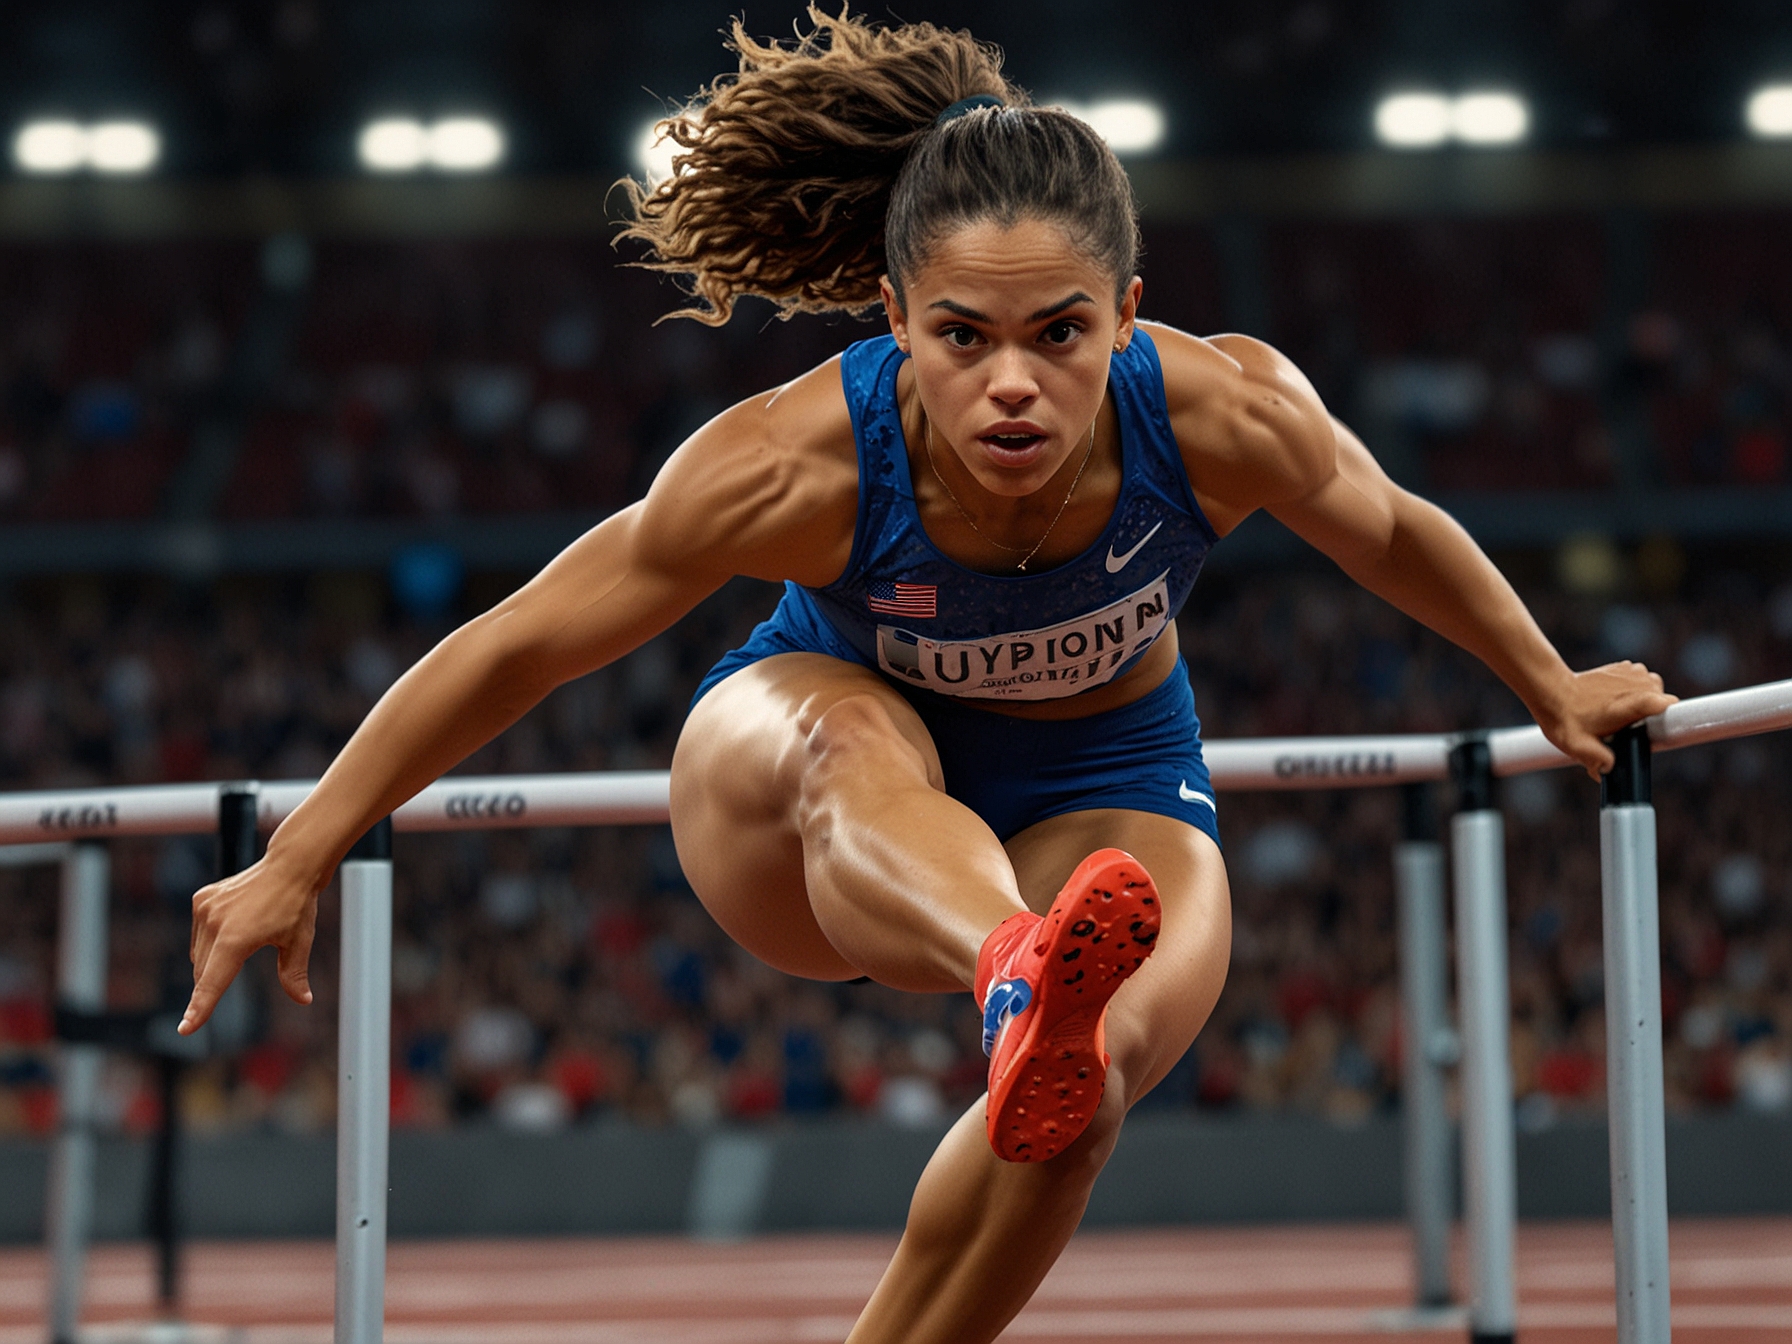 Sydney McLaughlin-Levrone clearing one of the 10 hurdles with flawless technique during her record-breaking 400-meter hurdles race at the U.S. Olympic trials in Eugene, Oregon.